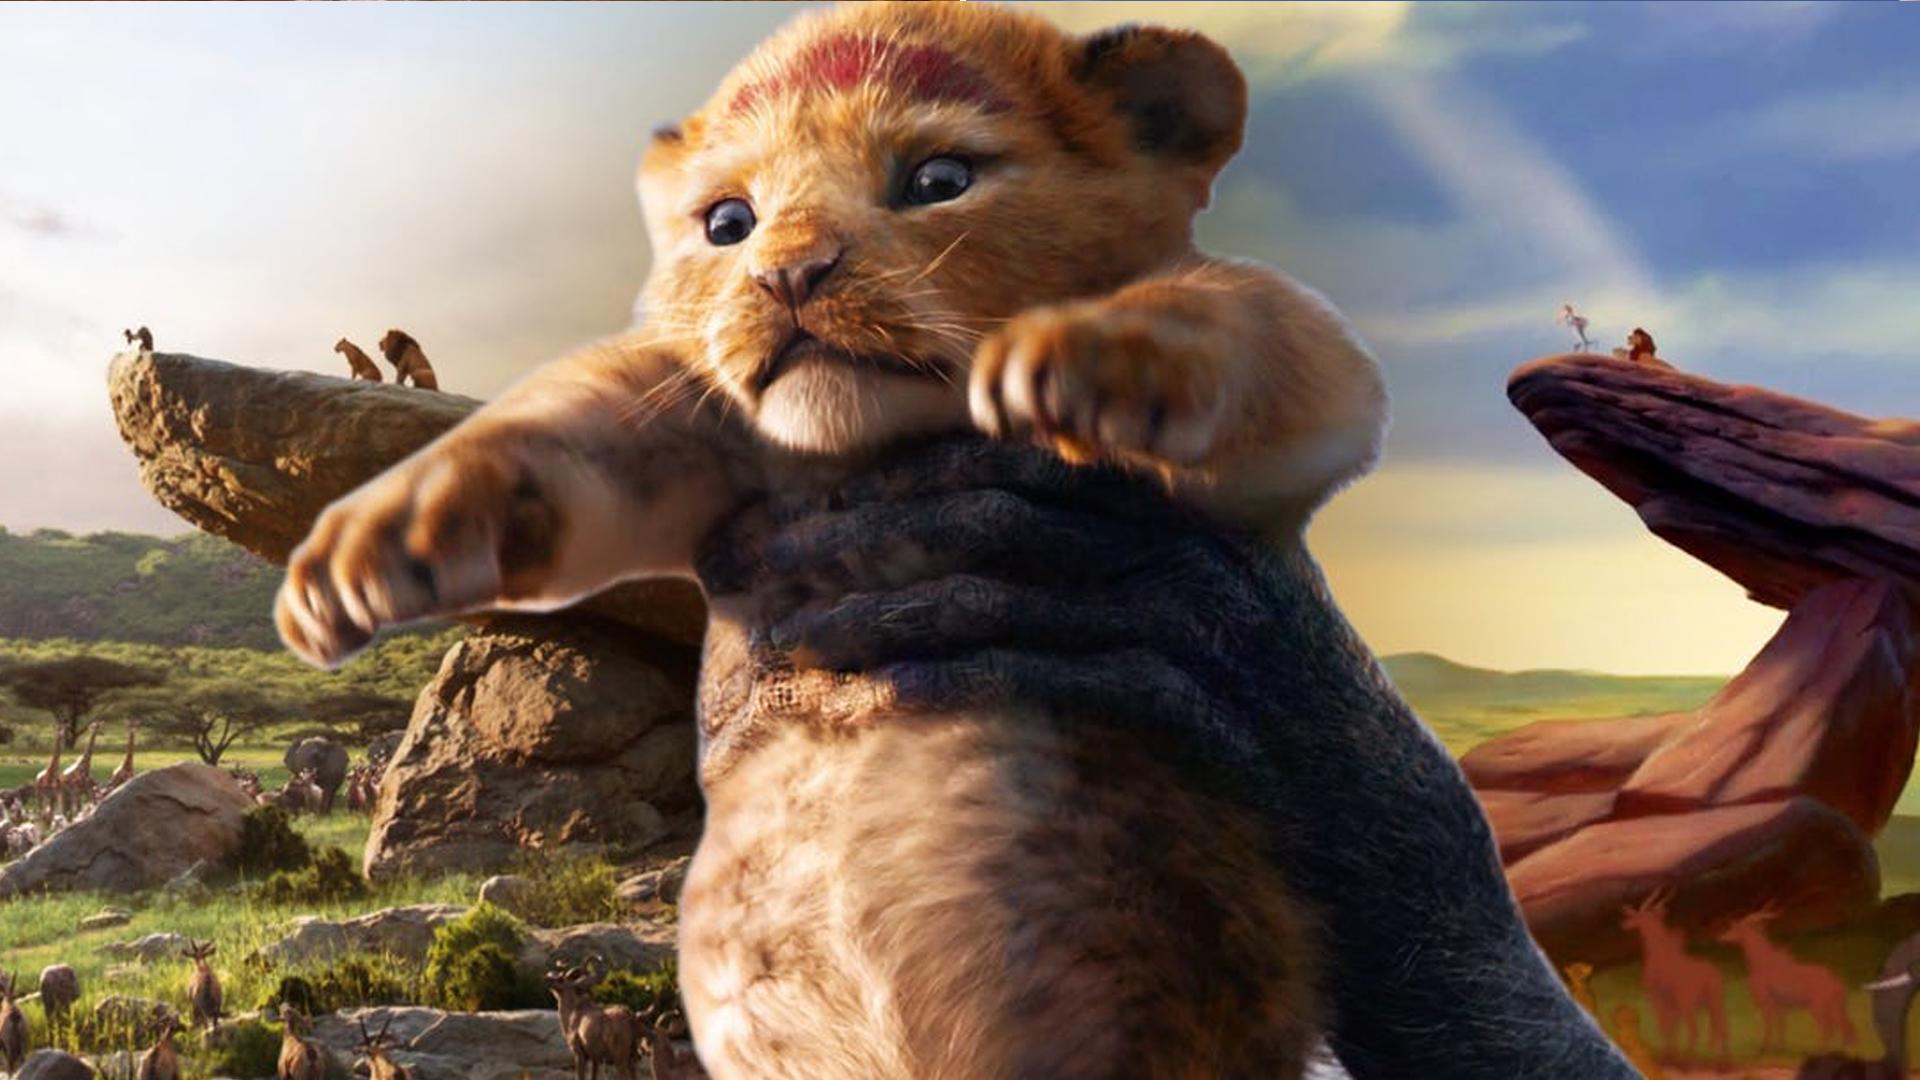 Disney's Upcoming Lion King Remake Pushes The Boundaries Of VR